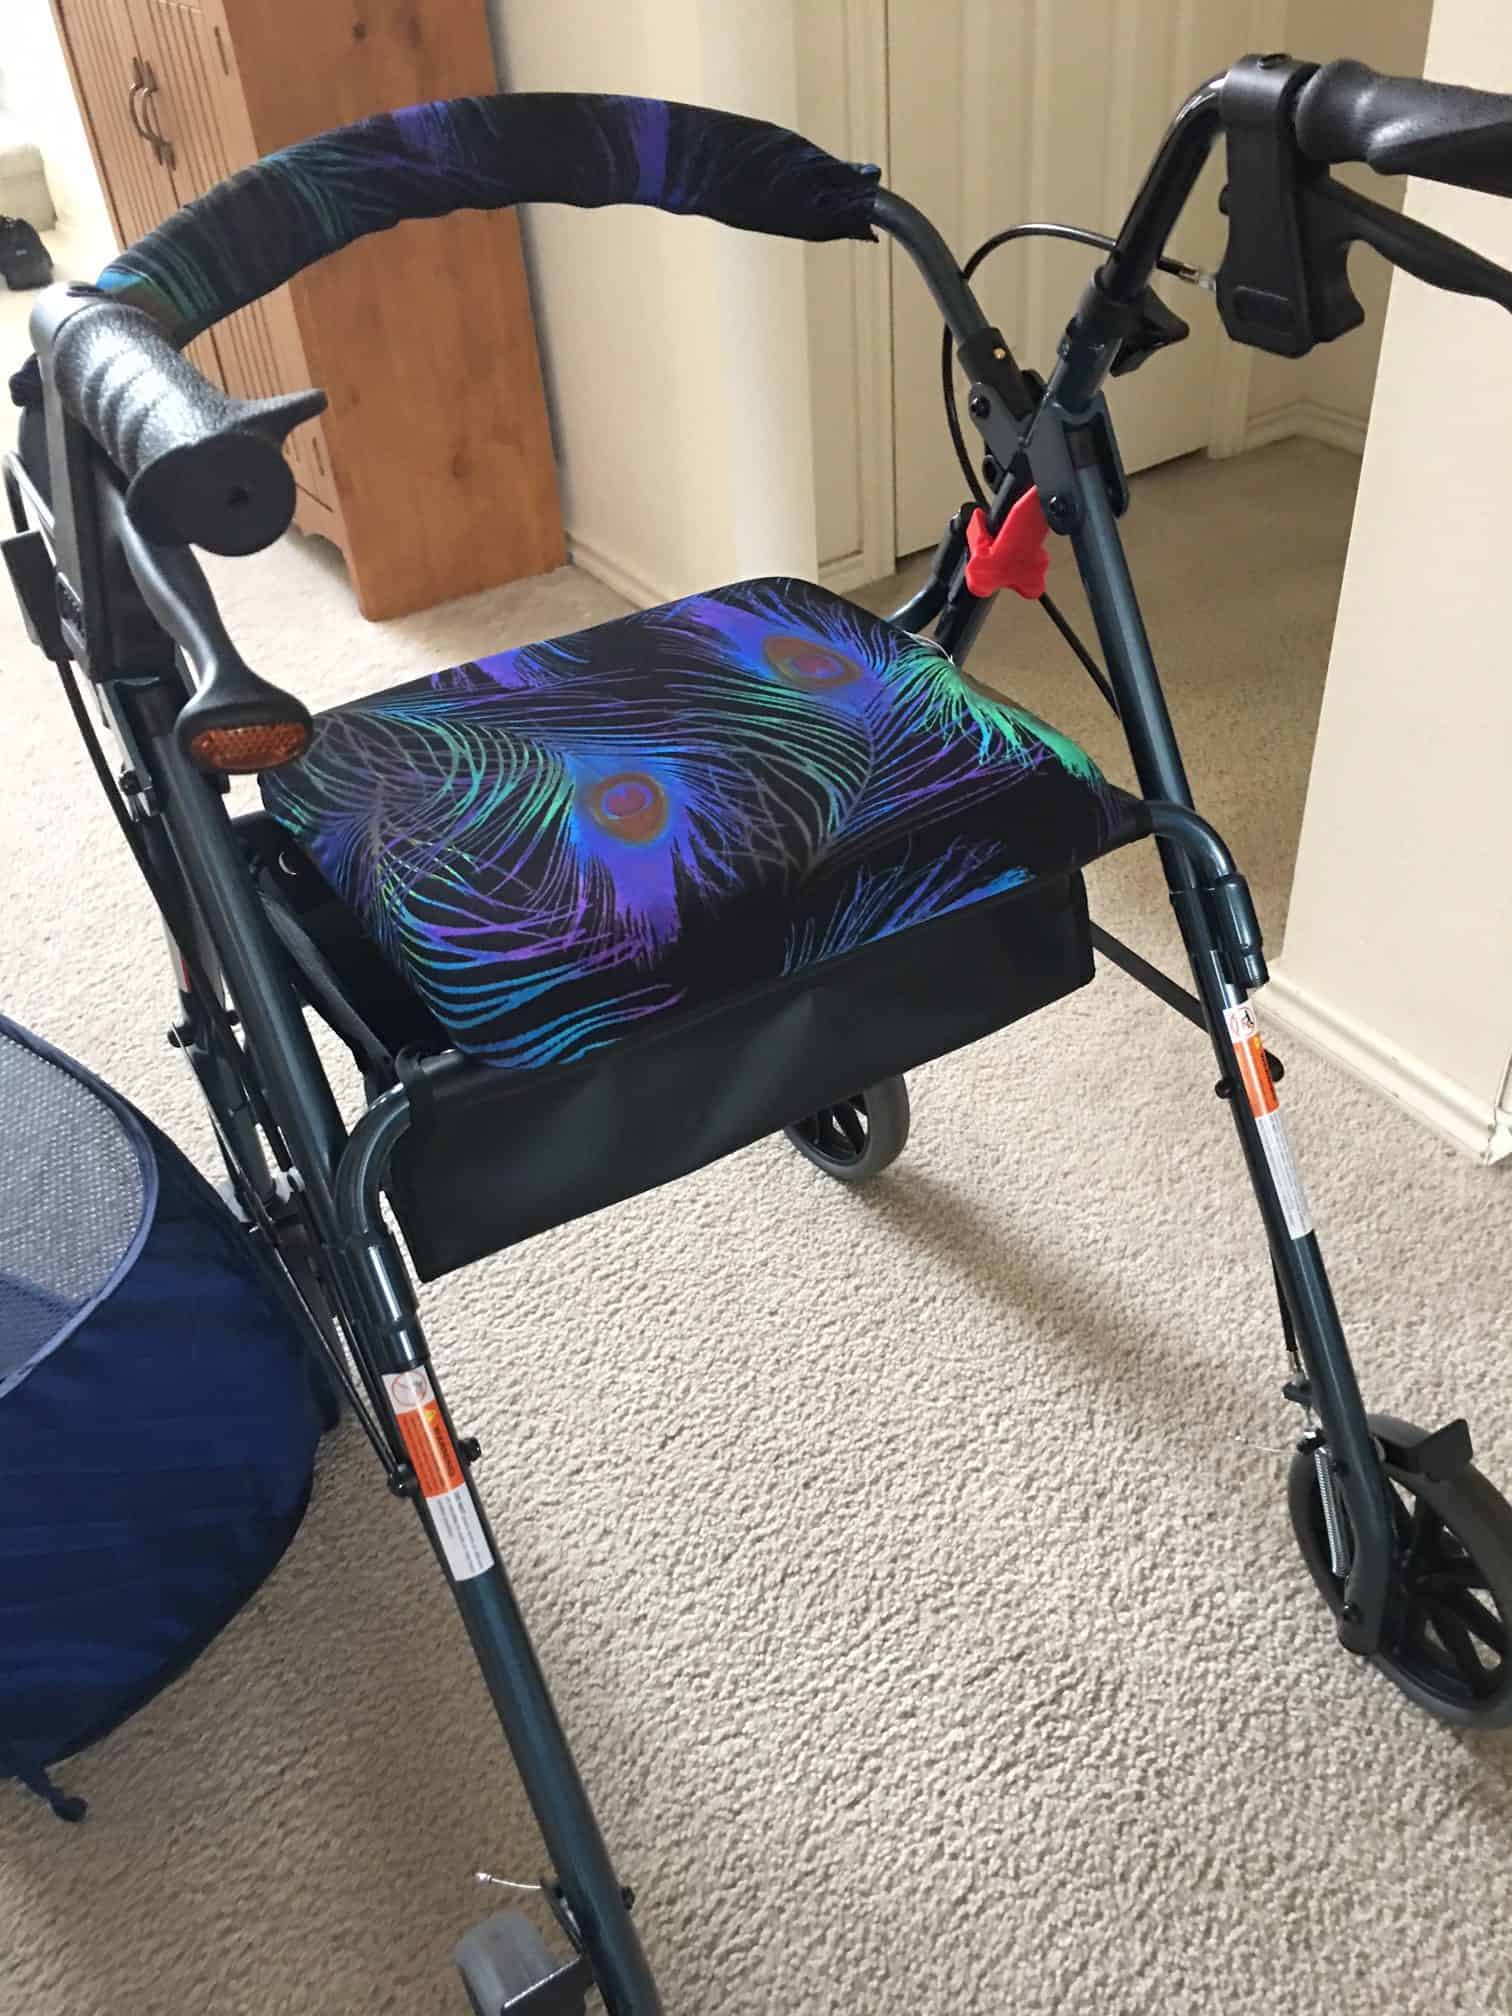 walker with peacock design on seat